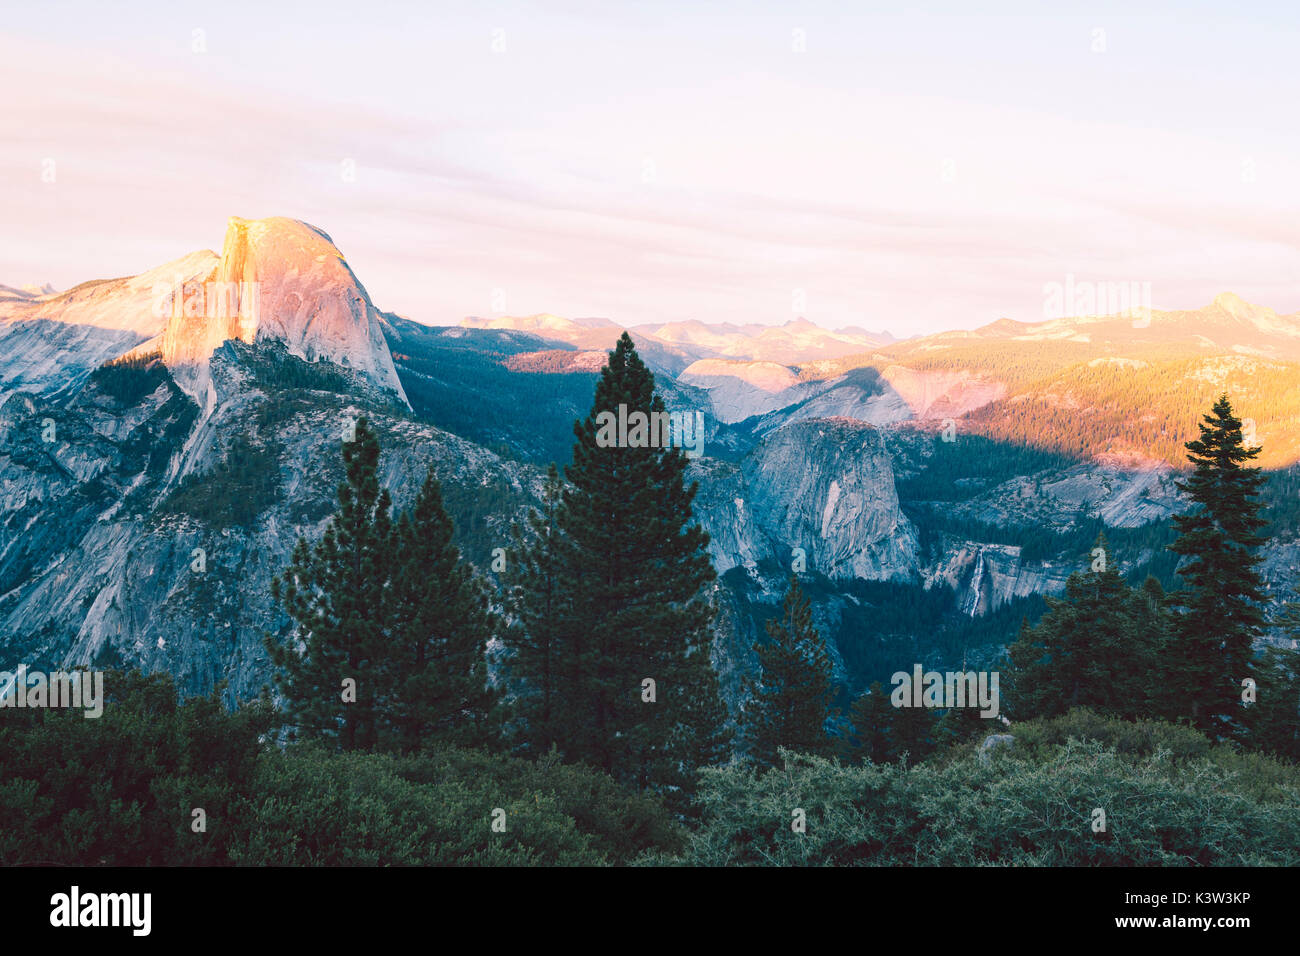 Yosemite National Park, California, USA. Sunset over the famous Half Dome Mount, view from Glacier Point Stock Photo